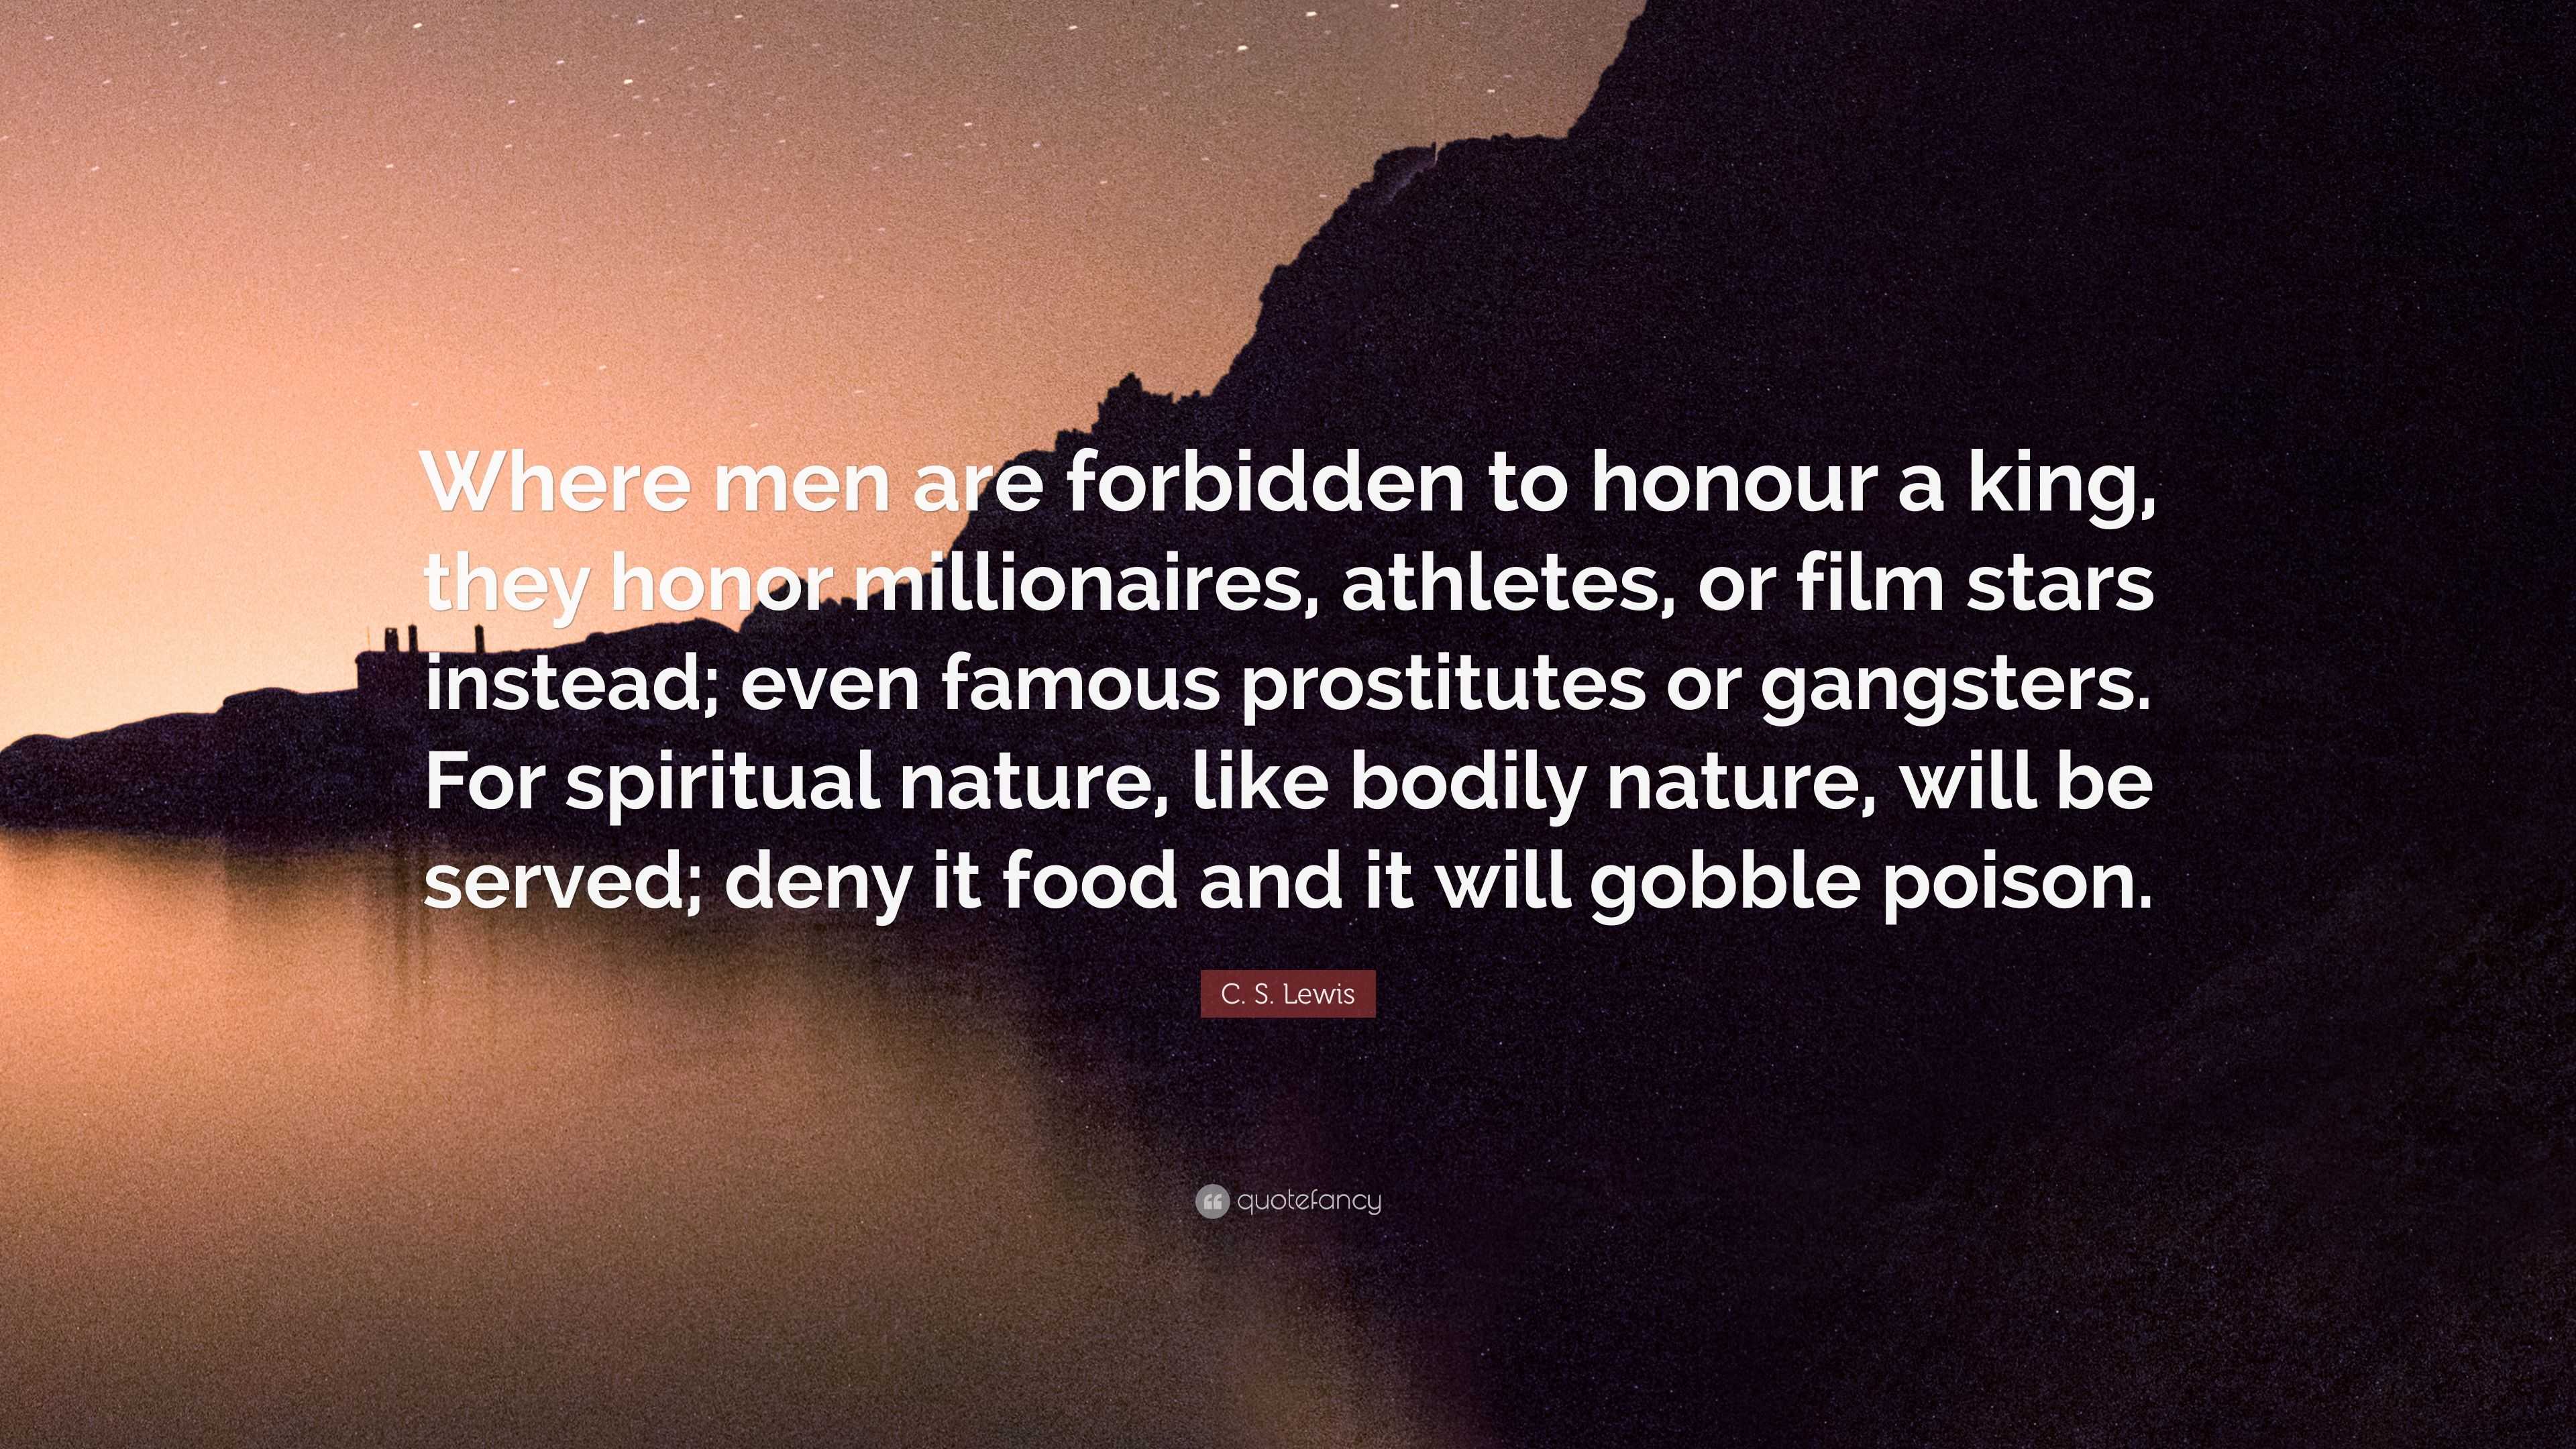 Where men are forbidden to honour a king, they honor millionaires, athletes...